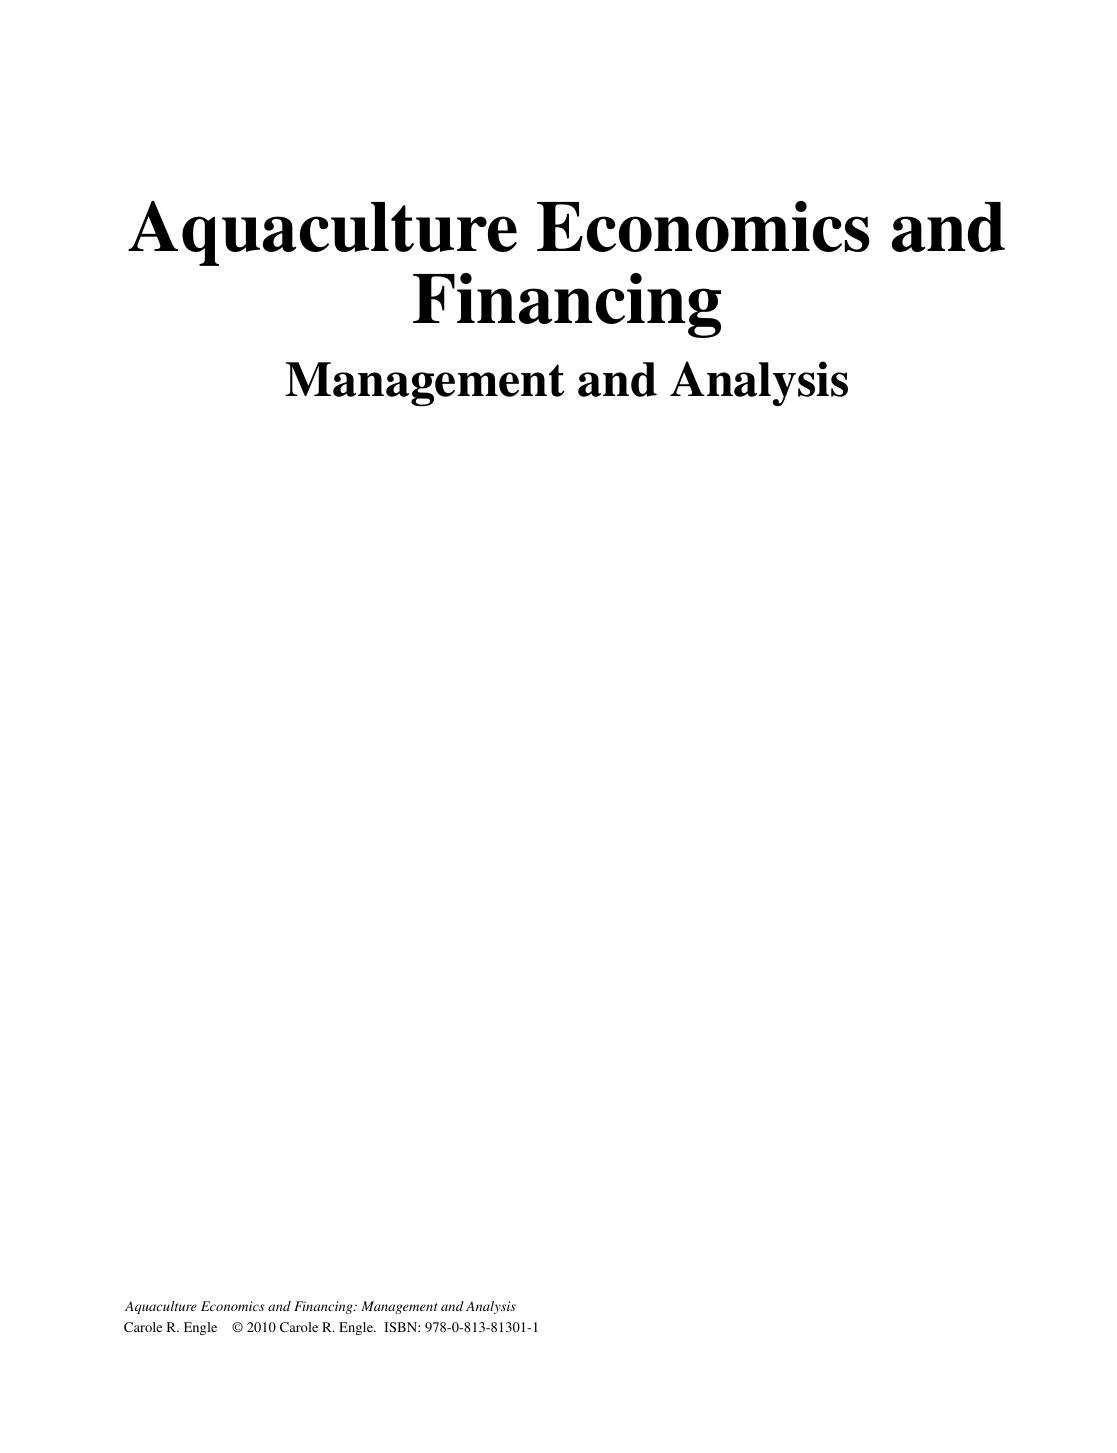 Aquaculture Economics and Financing  Management and Analysis-Wiley-Blackwell (2010)